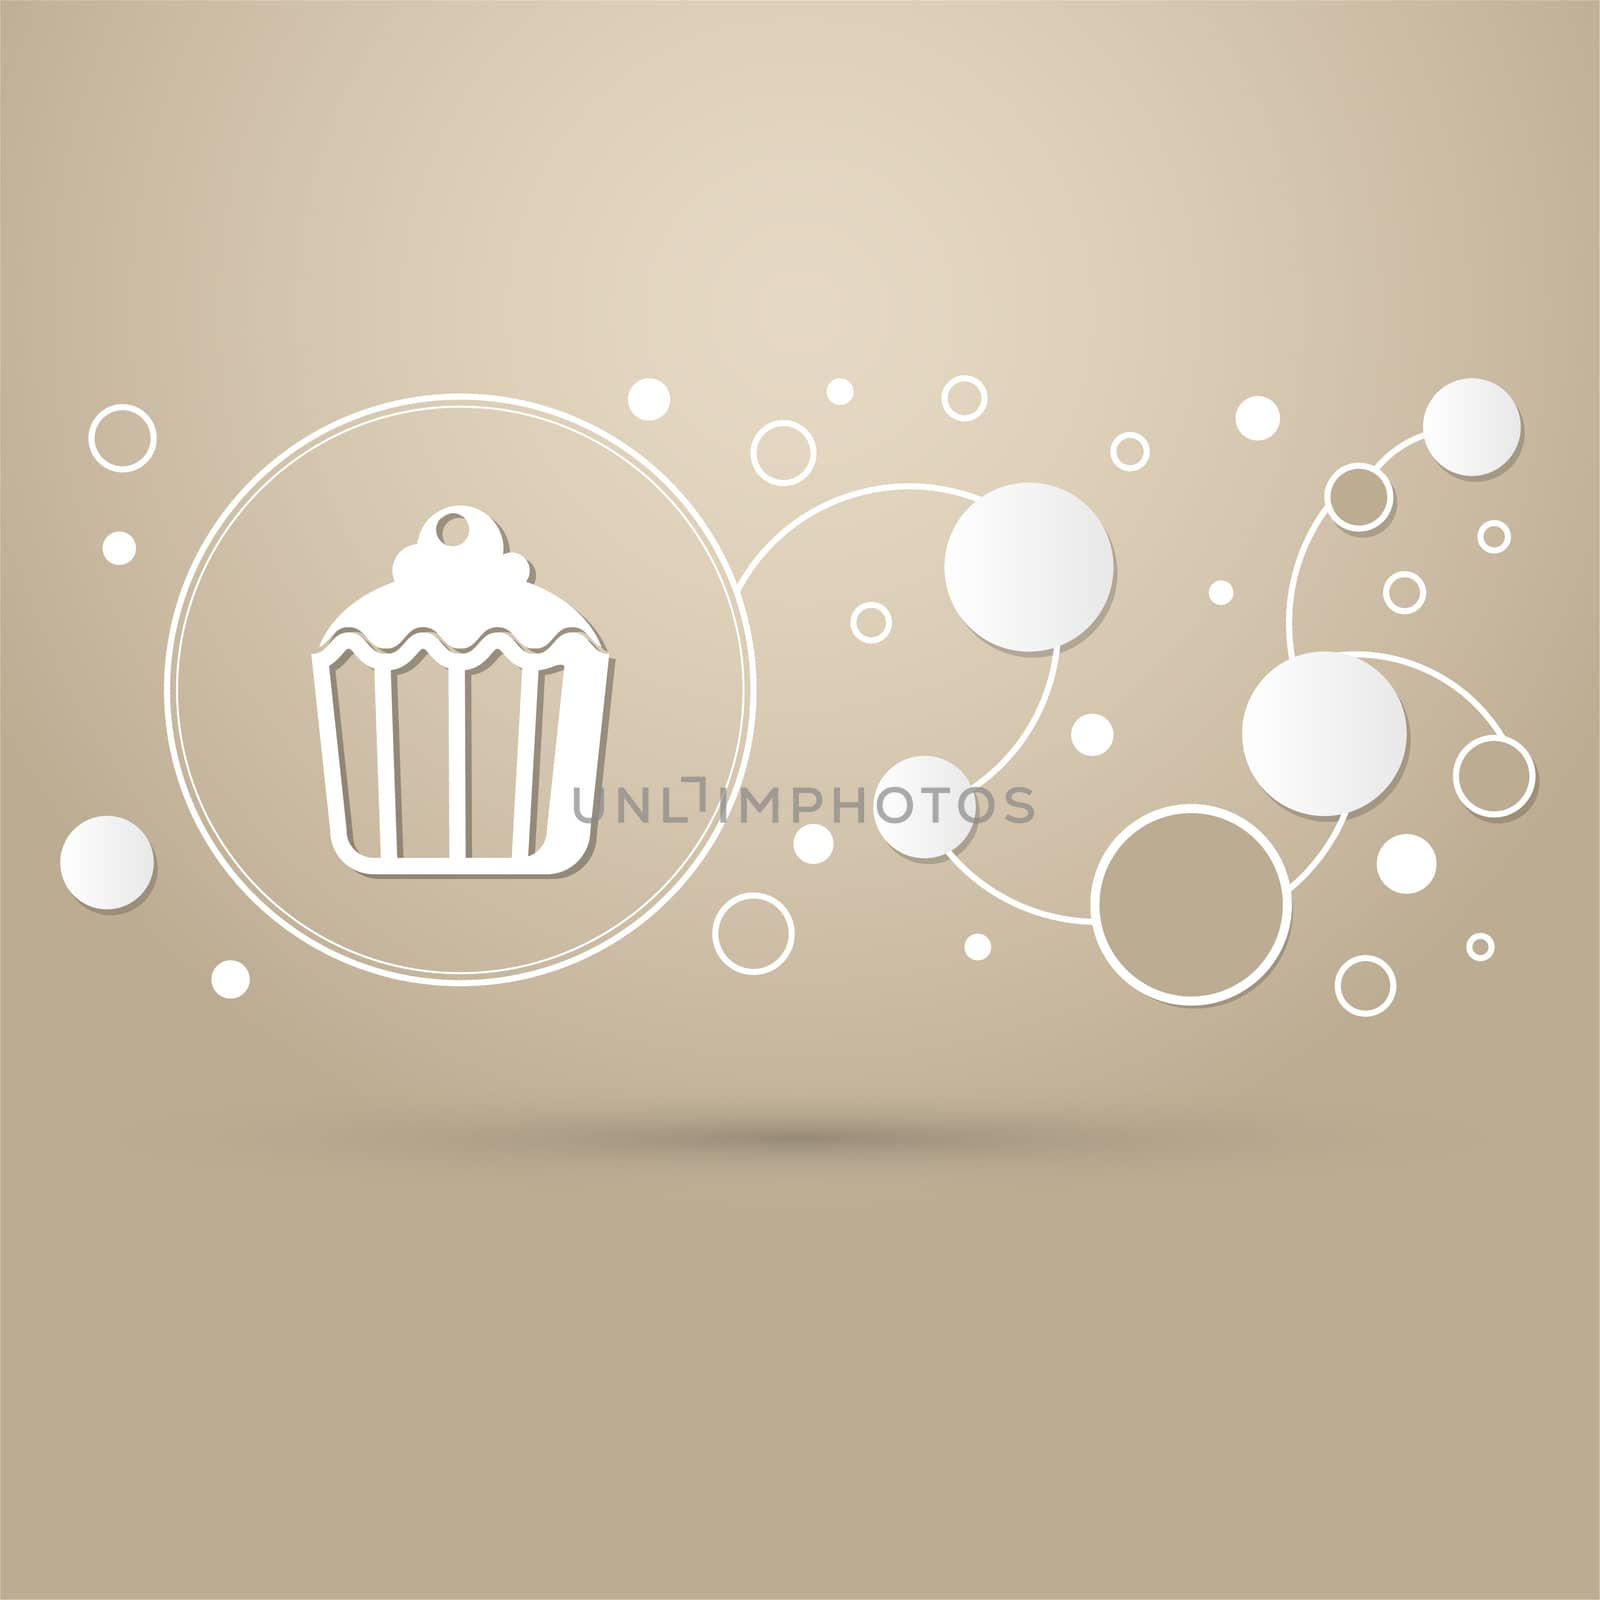 cupcake, muffin icon on a brown background with elegant style and modern design infographic.  by Adamchuk